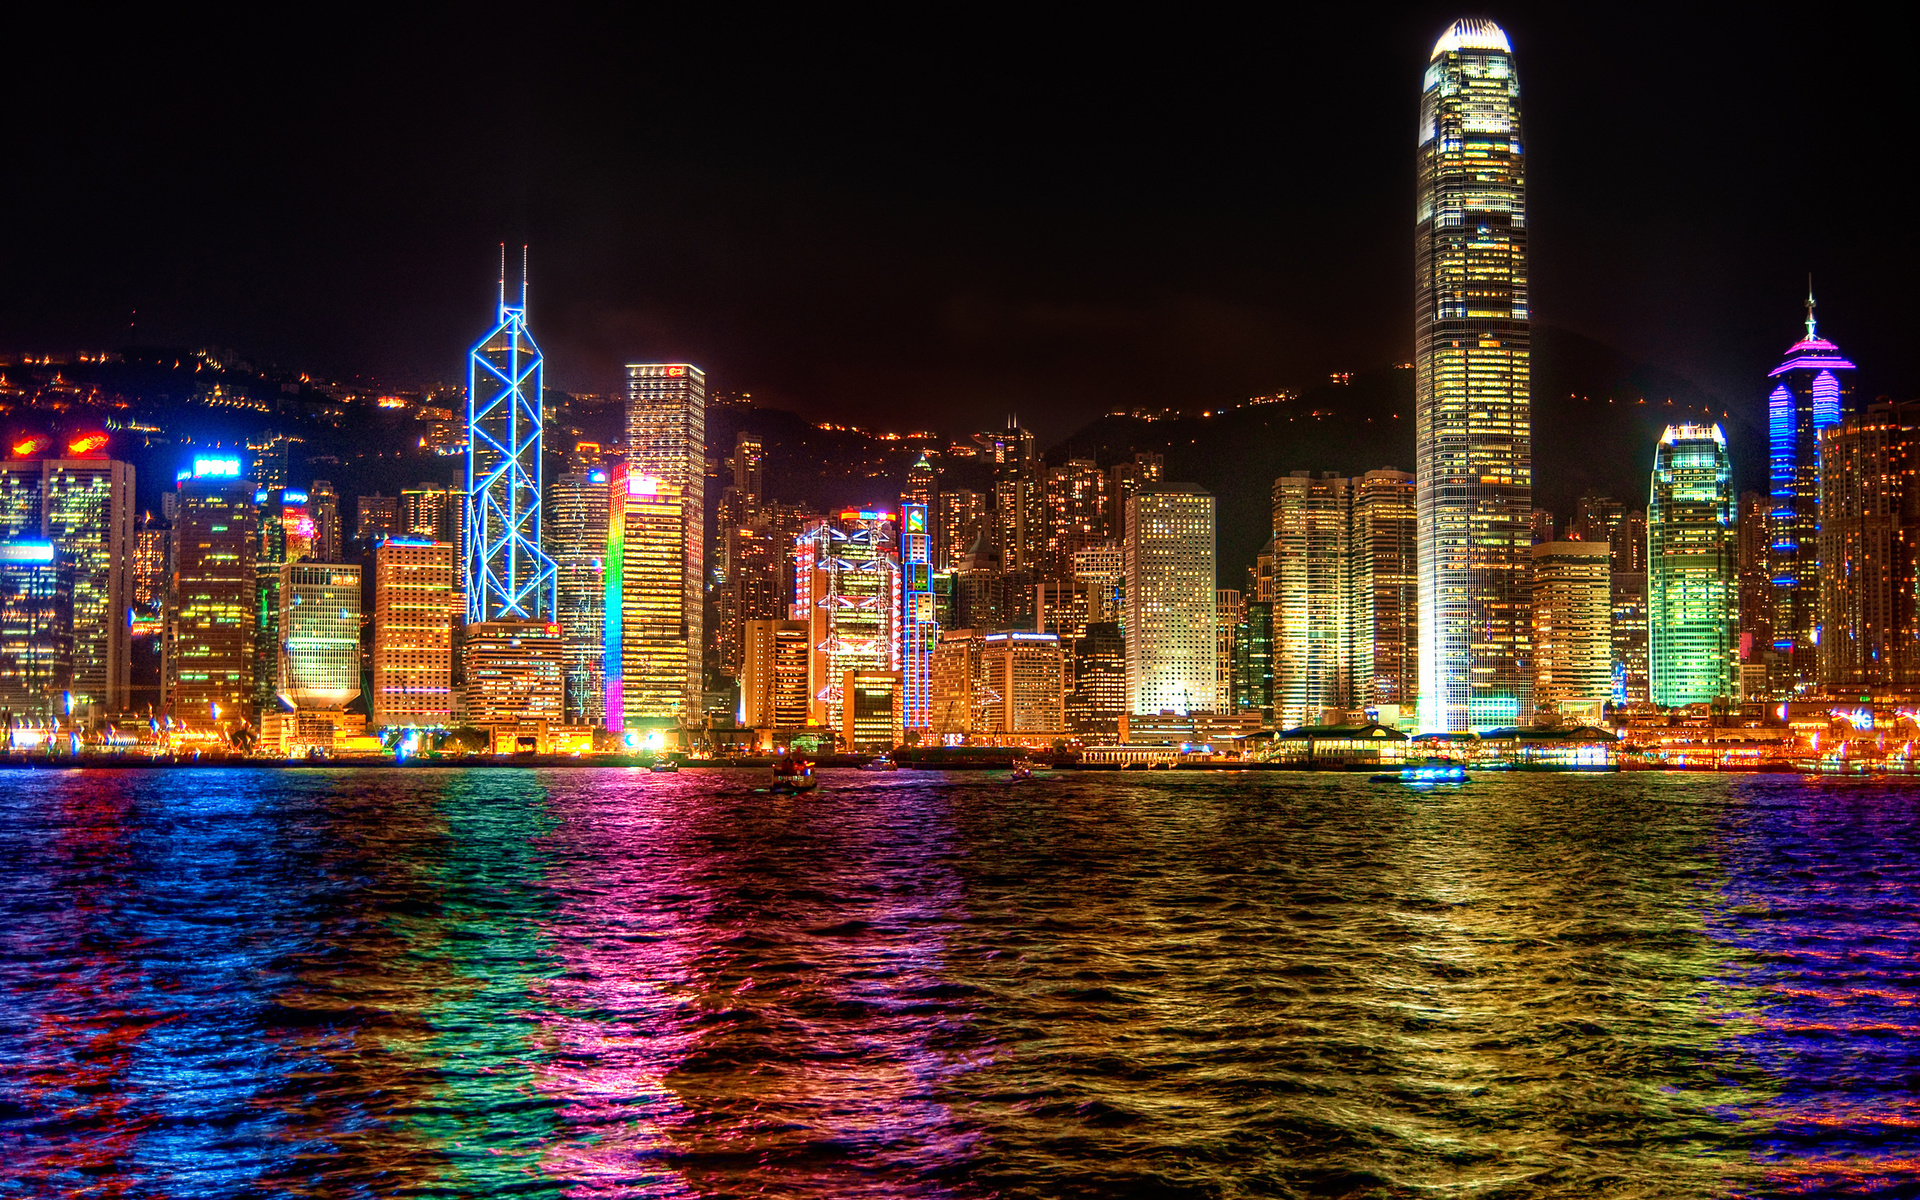 world, Cities, Architecture, Buildings, Structure, Skyscrapers, Window, Lights, Color, Hdr, Signs, Neon, Sound, Bay, Water, Reflection, Marina Wallpaper